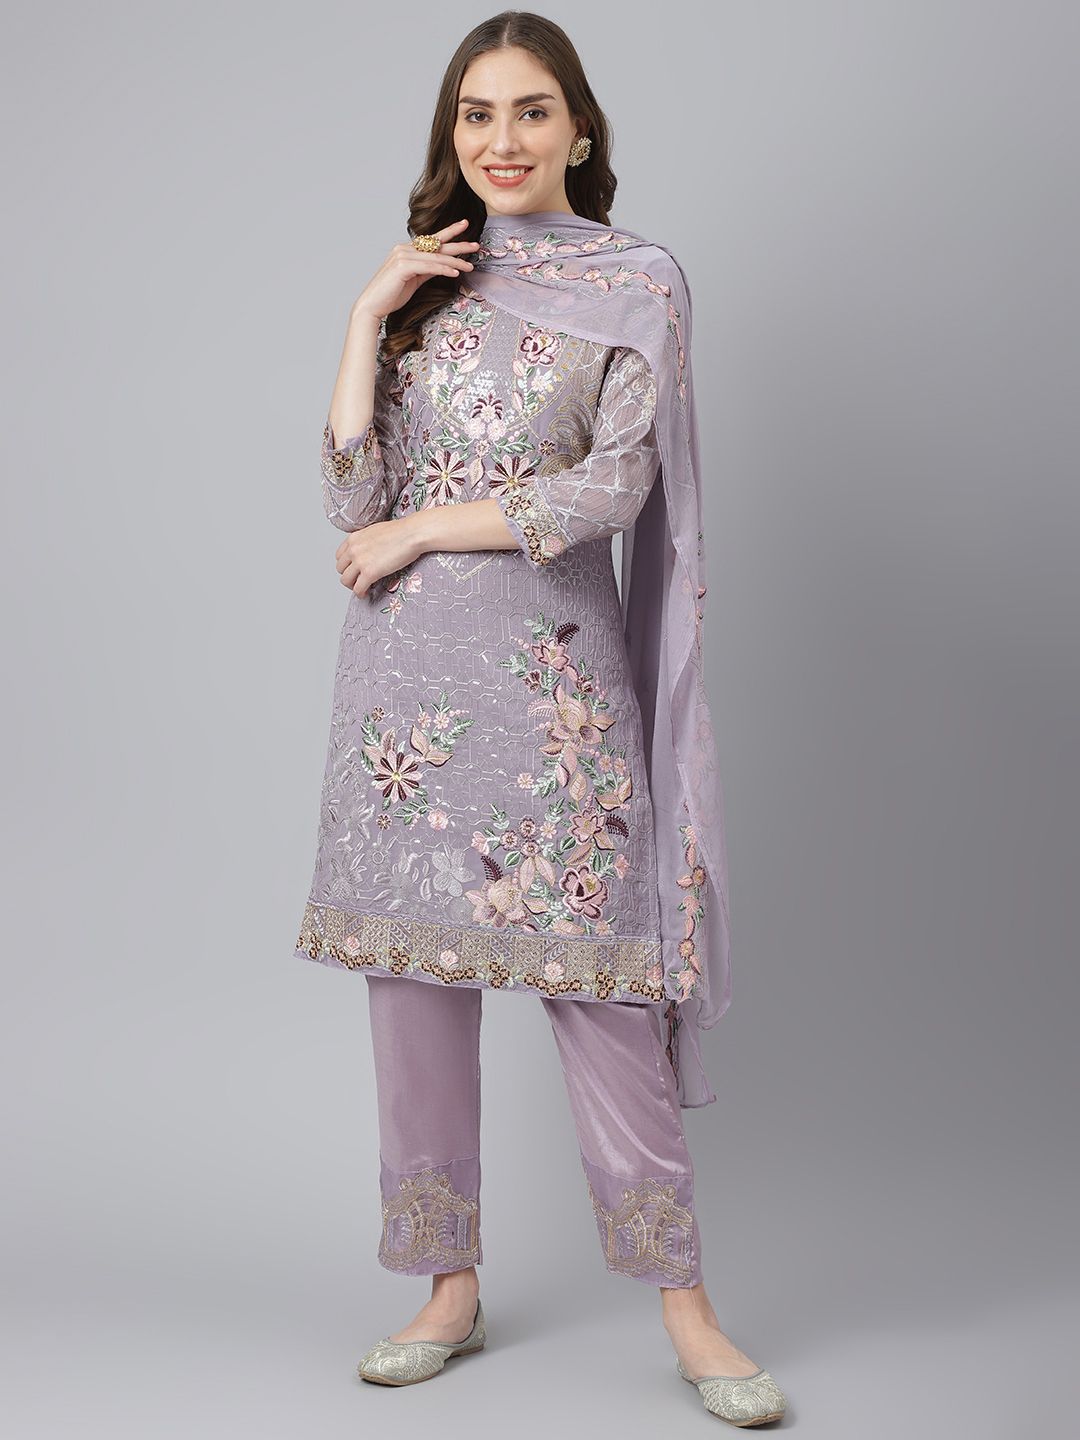 Readiprint Fashions Lavender Embroidered Unstitched Dress Material Price in India